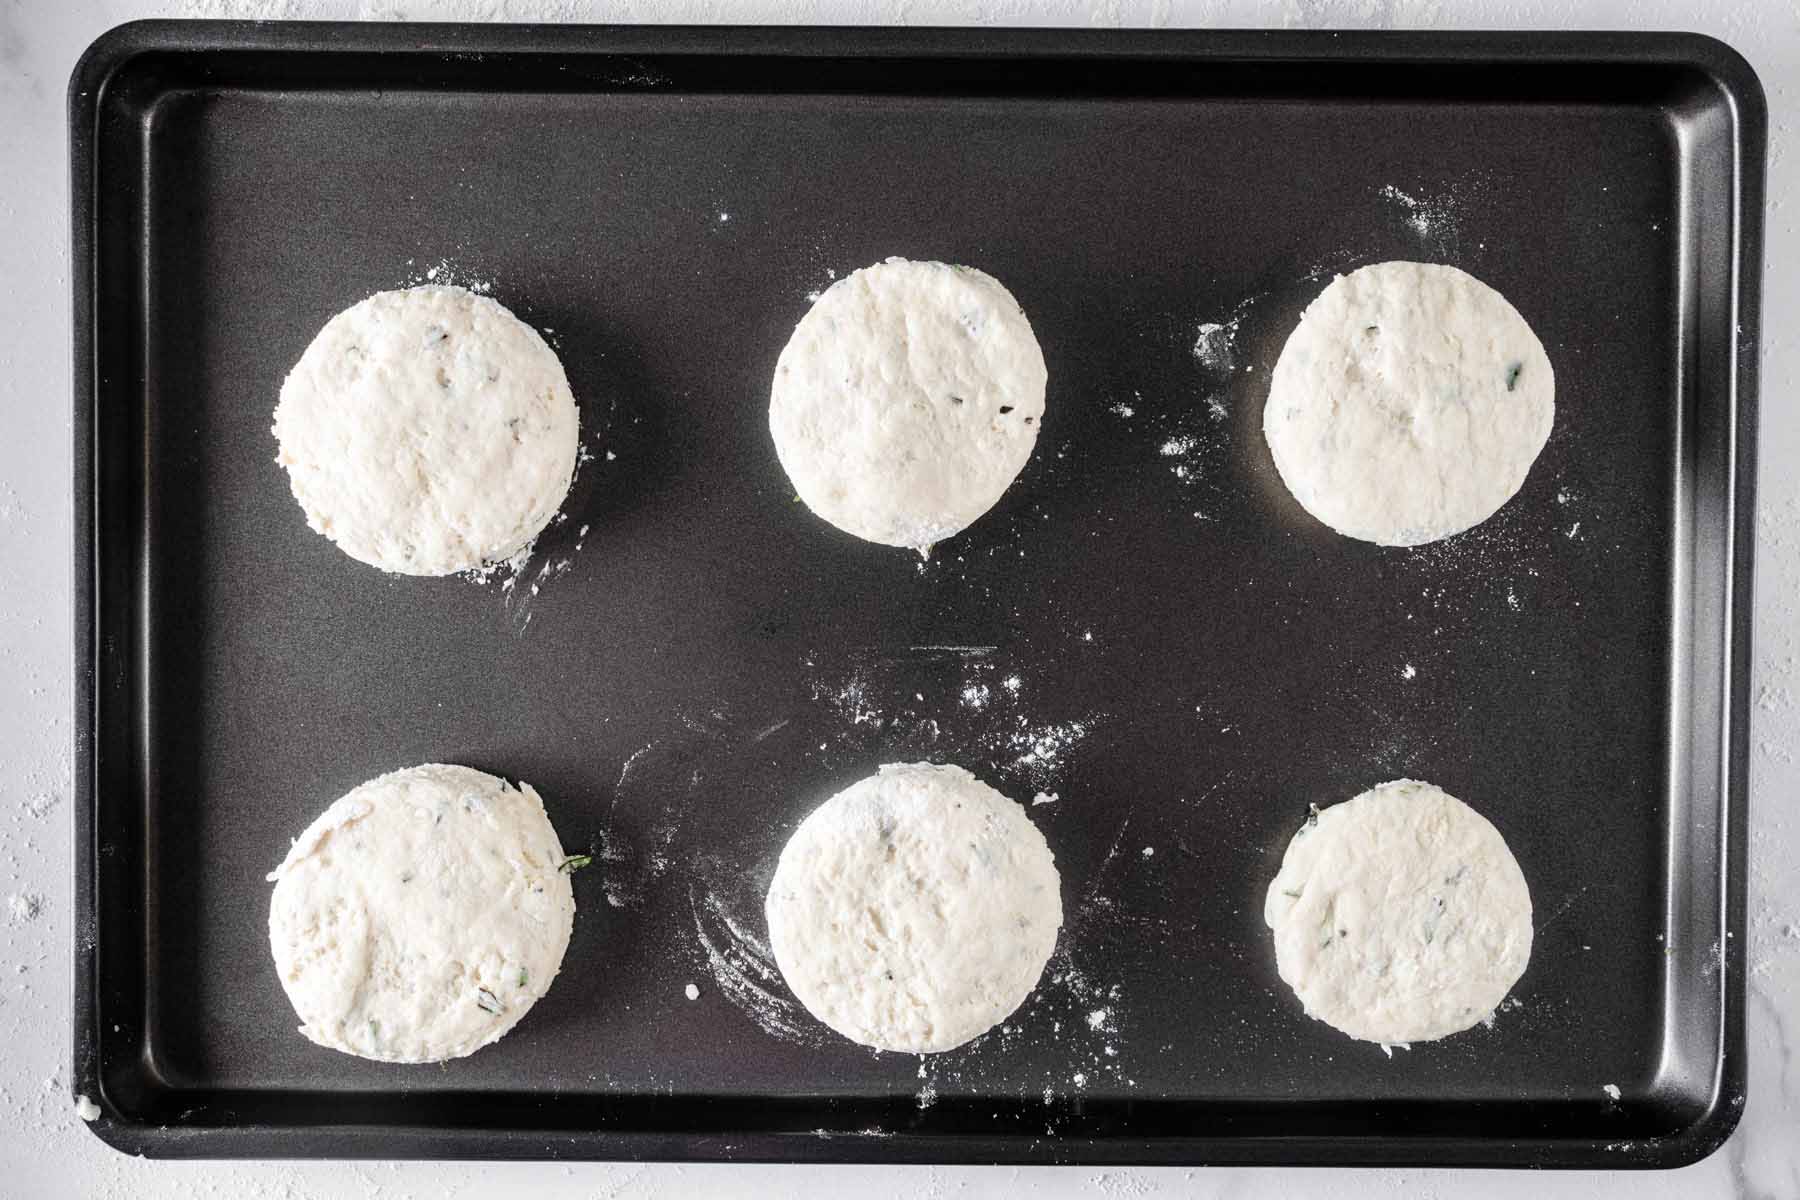 Six unbaked biscuits laid out onto a baking sheet.